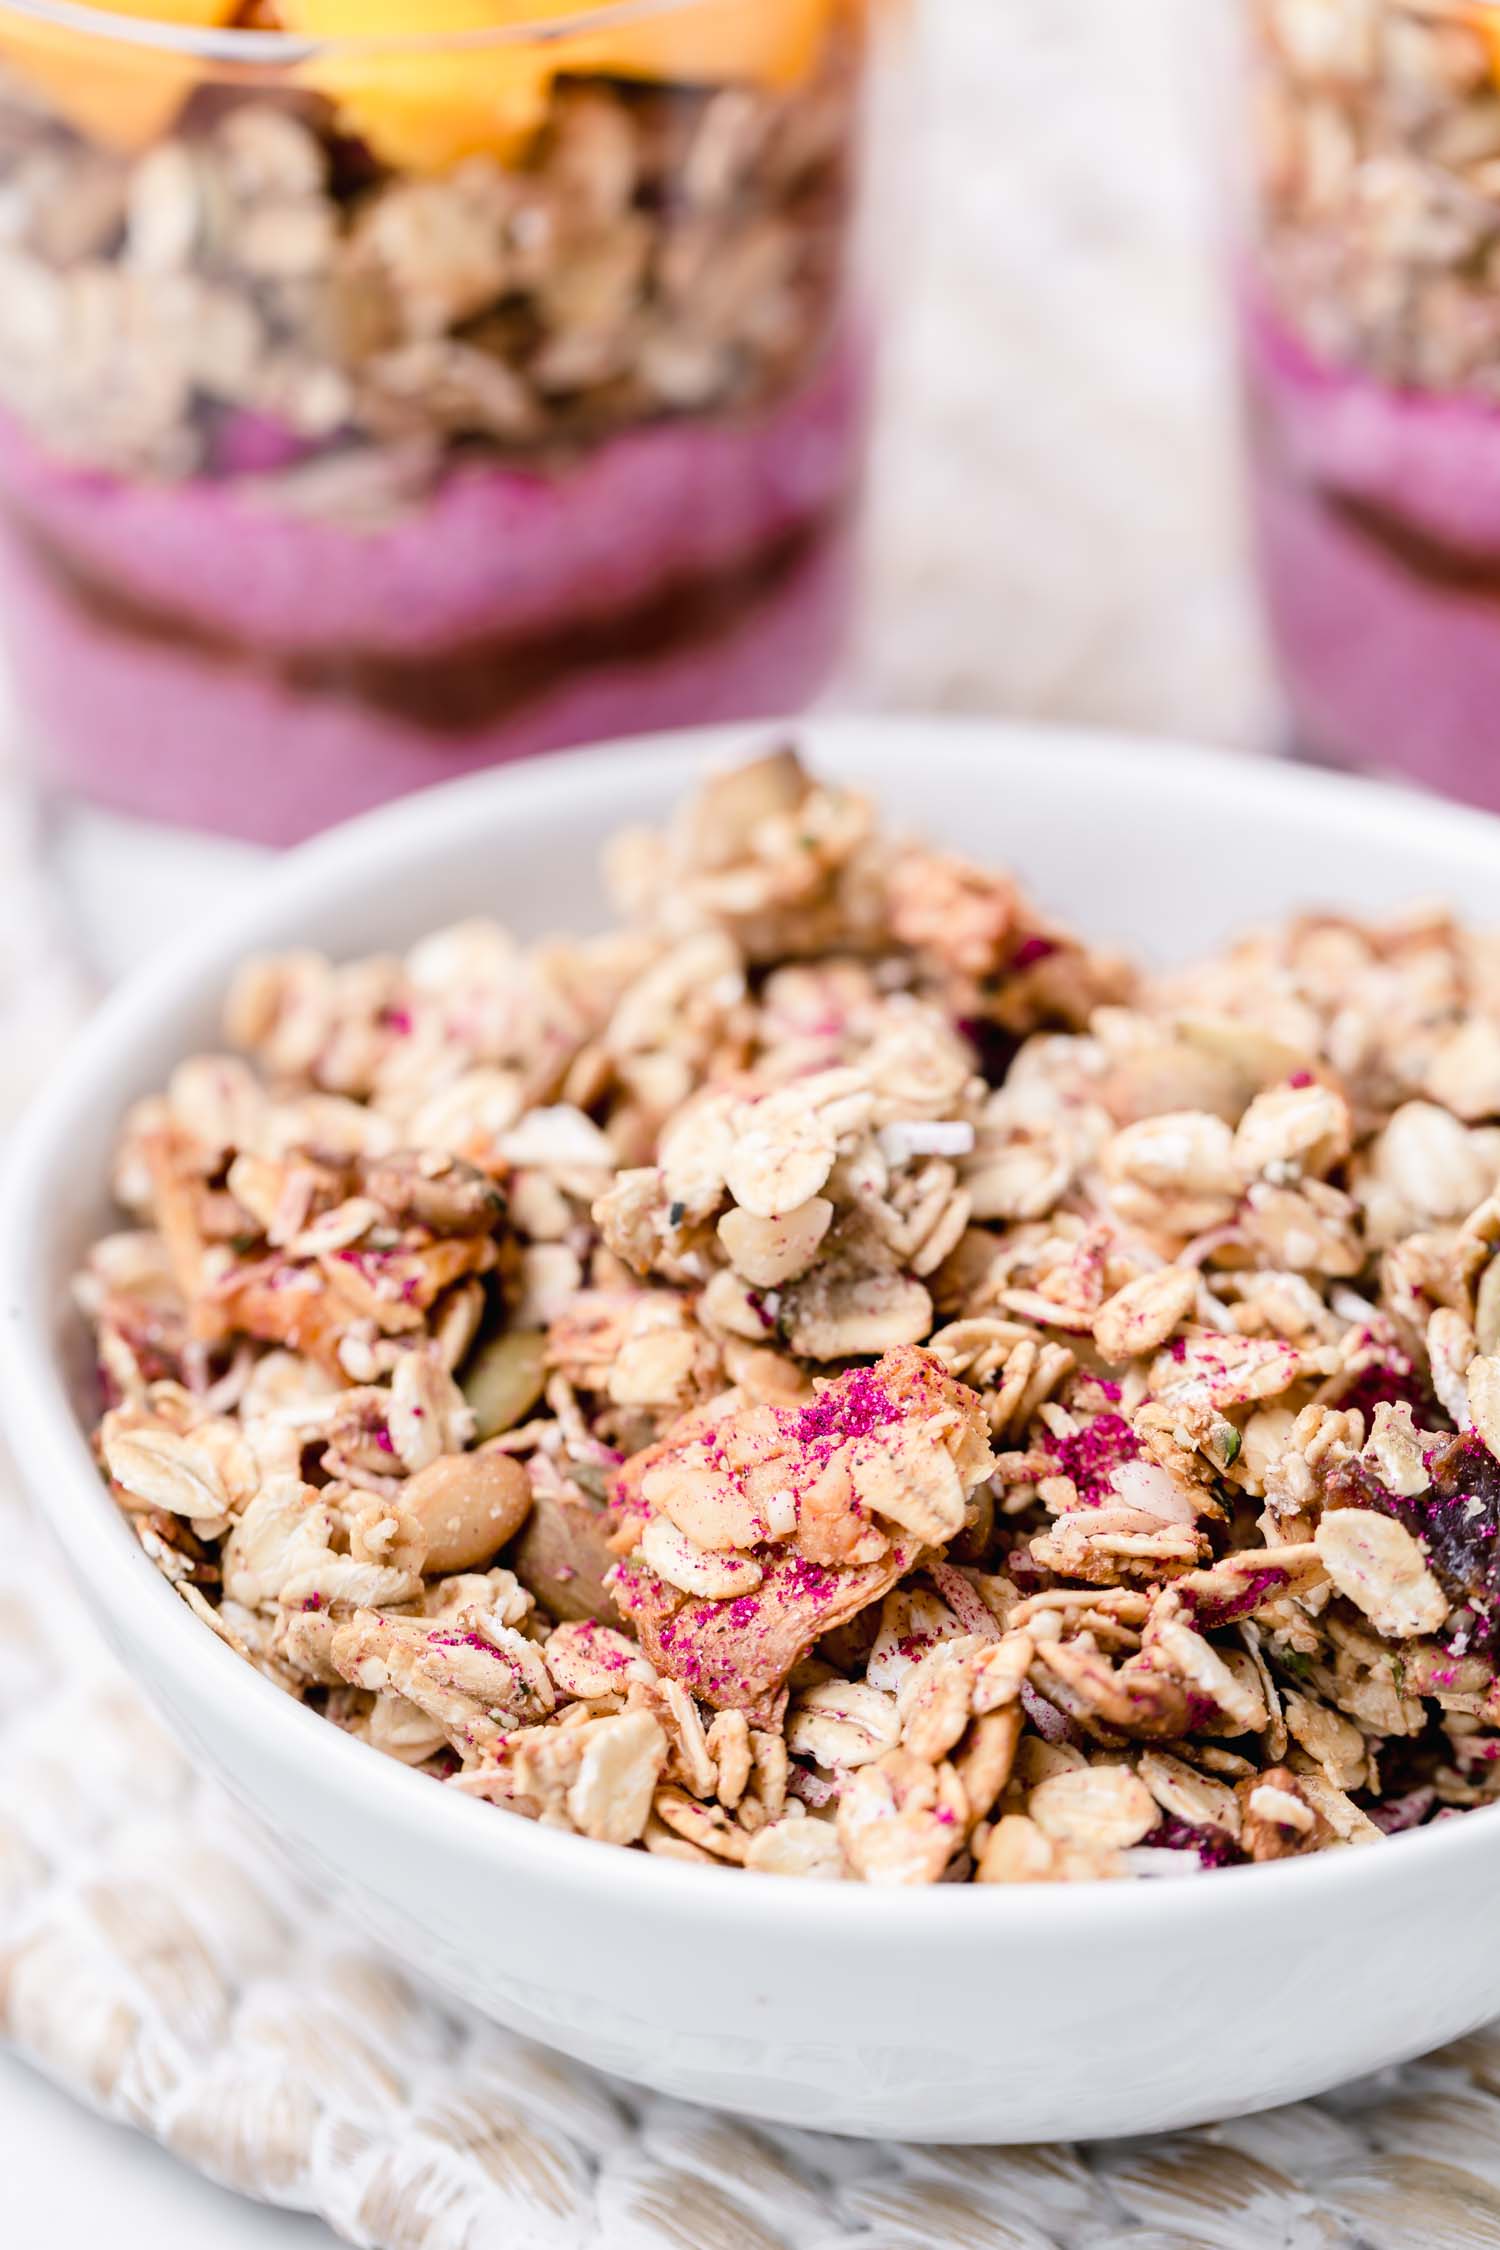 Tropical granola flavored with banana, pineapple, coconut, and macadamia nuts and dusted pink with pitaya (dragon fruit) powder. #tropicalgranola #granolarecipe #summerrecipe #summertime #tropical #tropicalrecipe #vegangranola #veganrecipe #glutenfreevegan #pinkfood